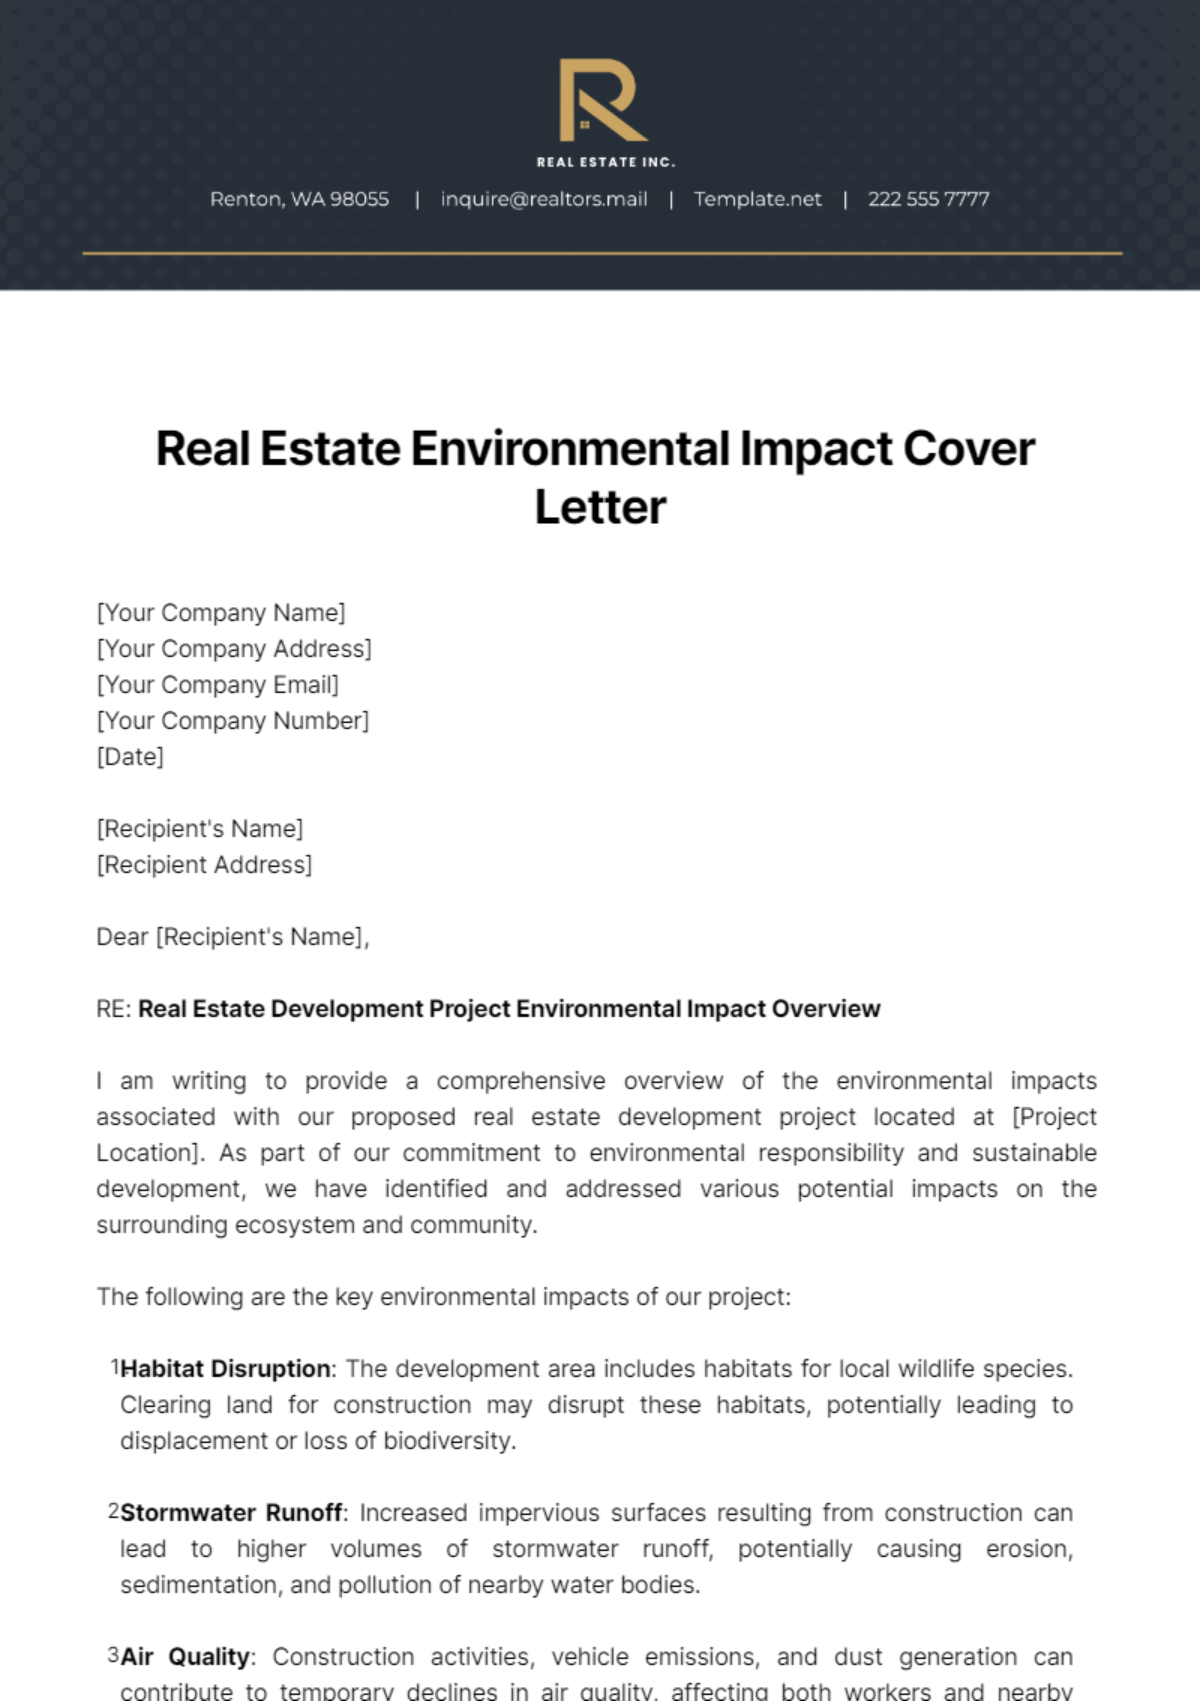 Real Estate Environmental Impact Cover Letter Template